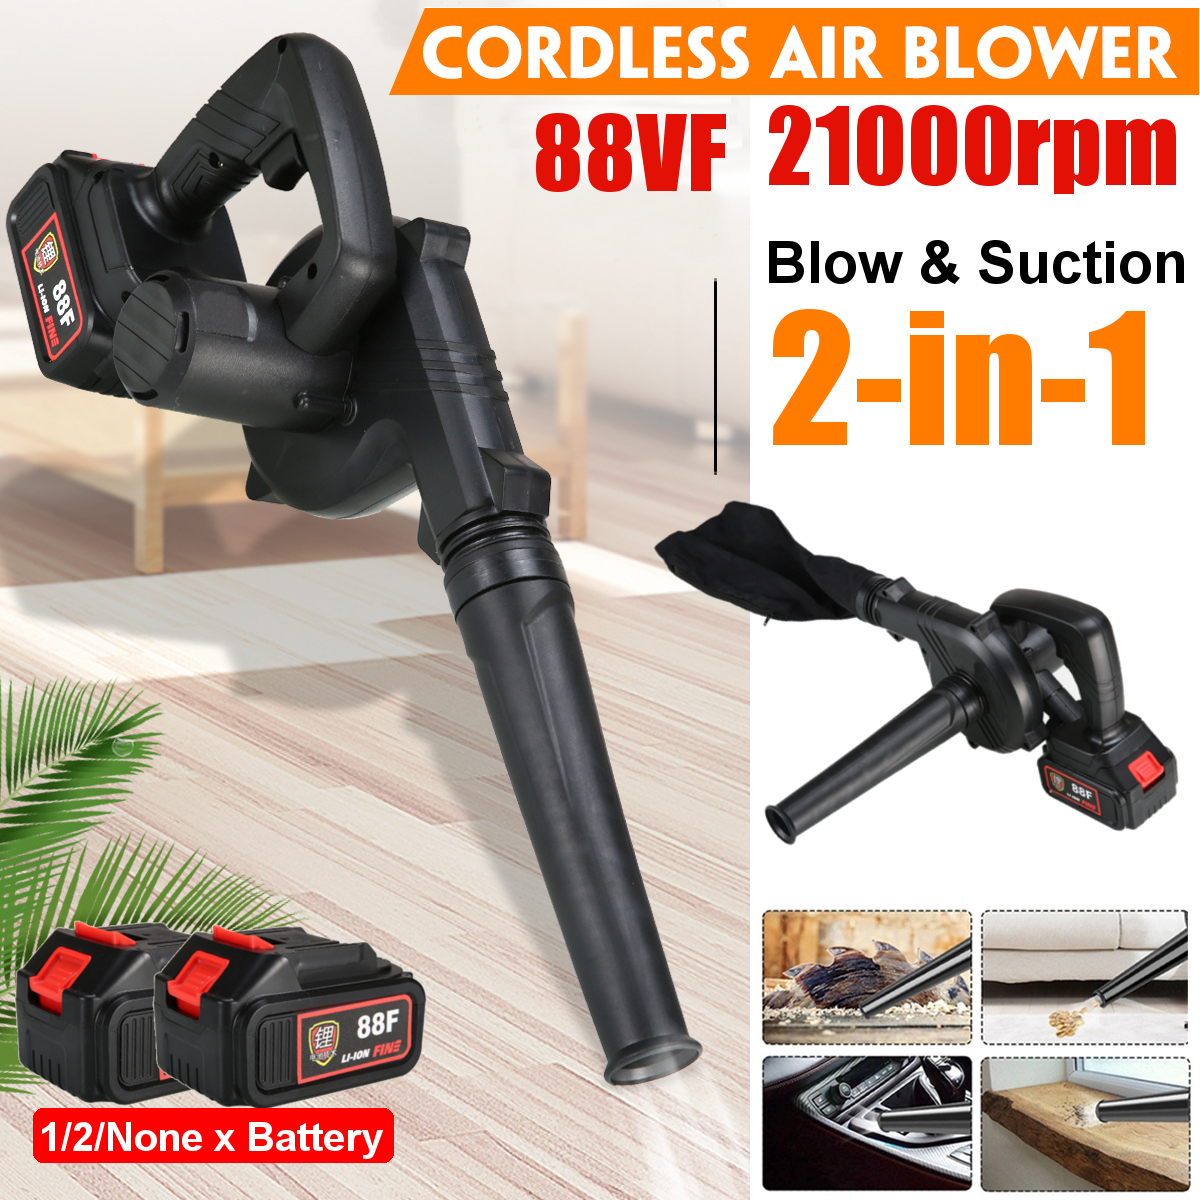 88VF-1500W-2-in-1-Electric-Air-Blower-Wireless-Vehicle-Computer-Vacuum-Dust-Collector-Leaf-Cleaner-W-1861025-3